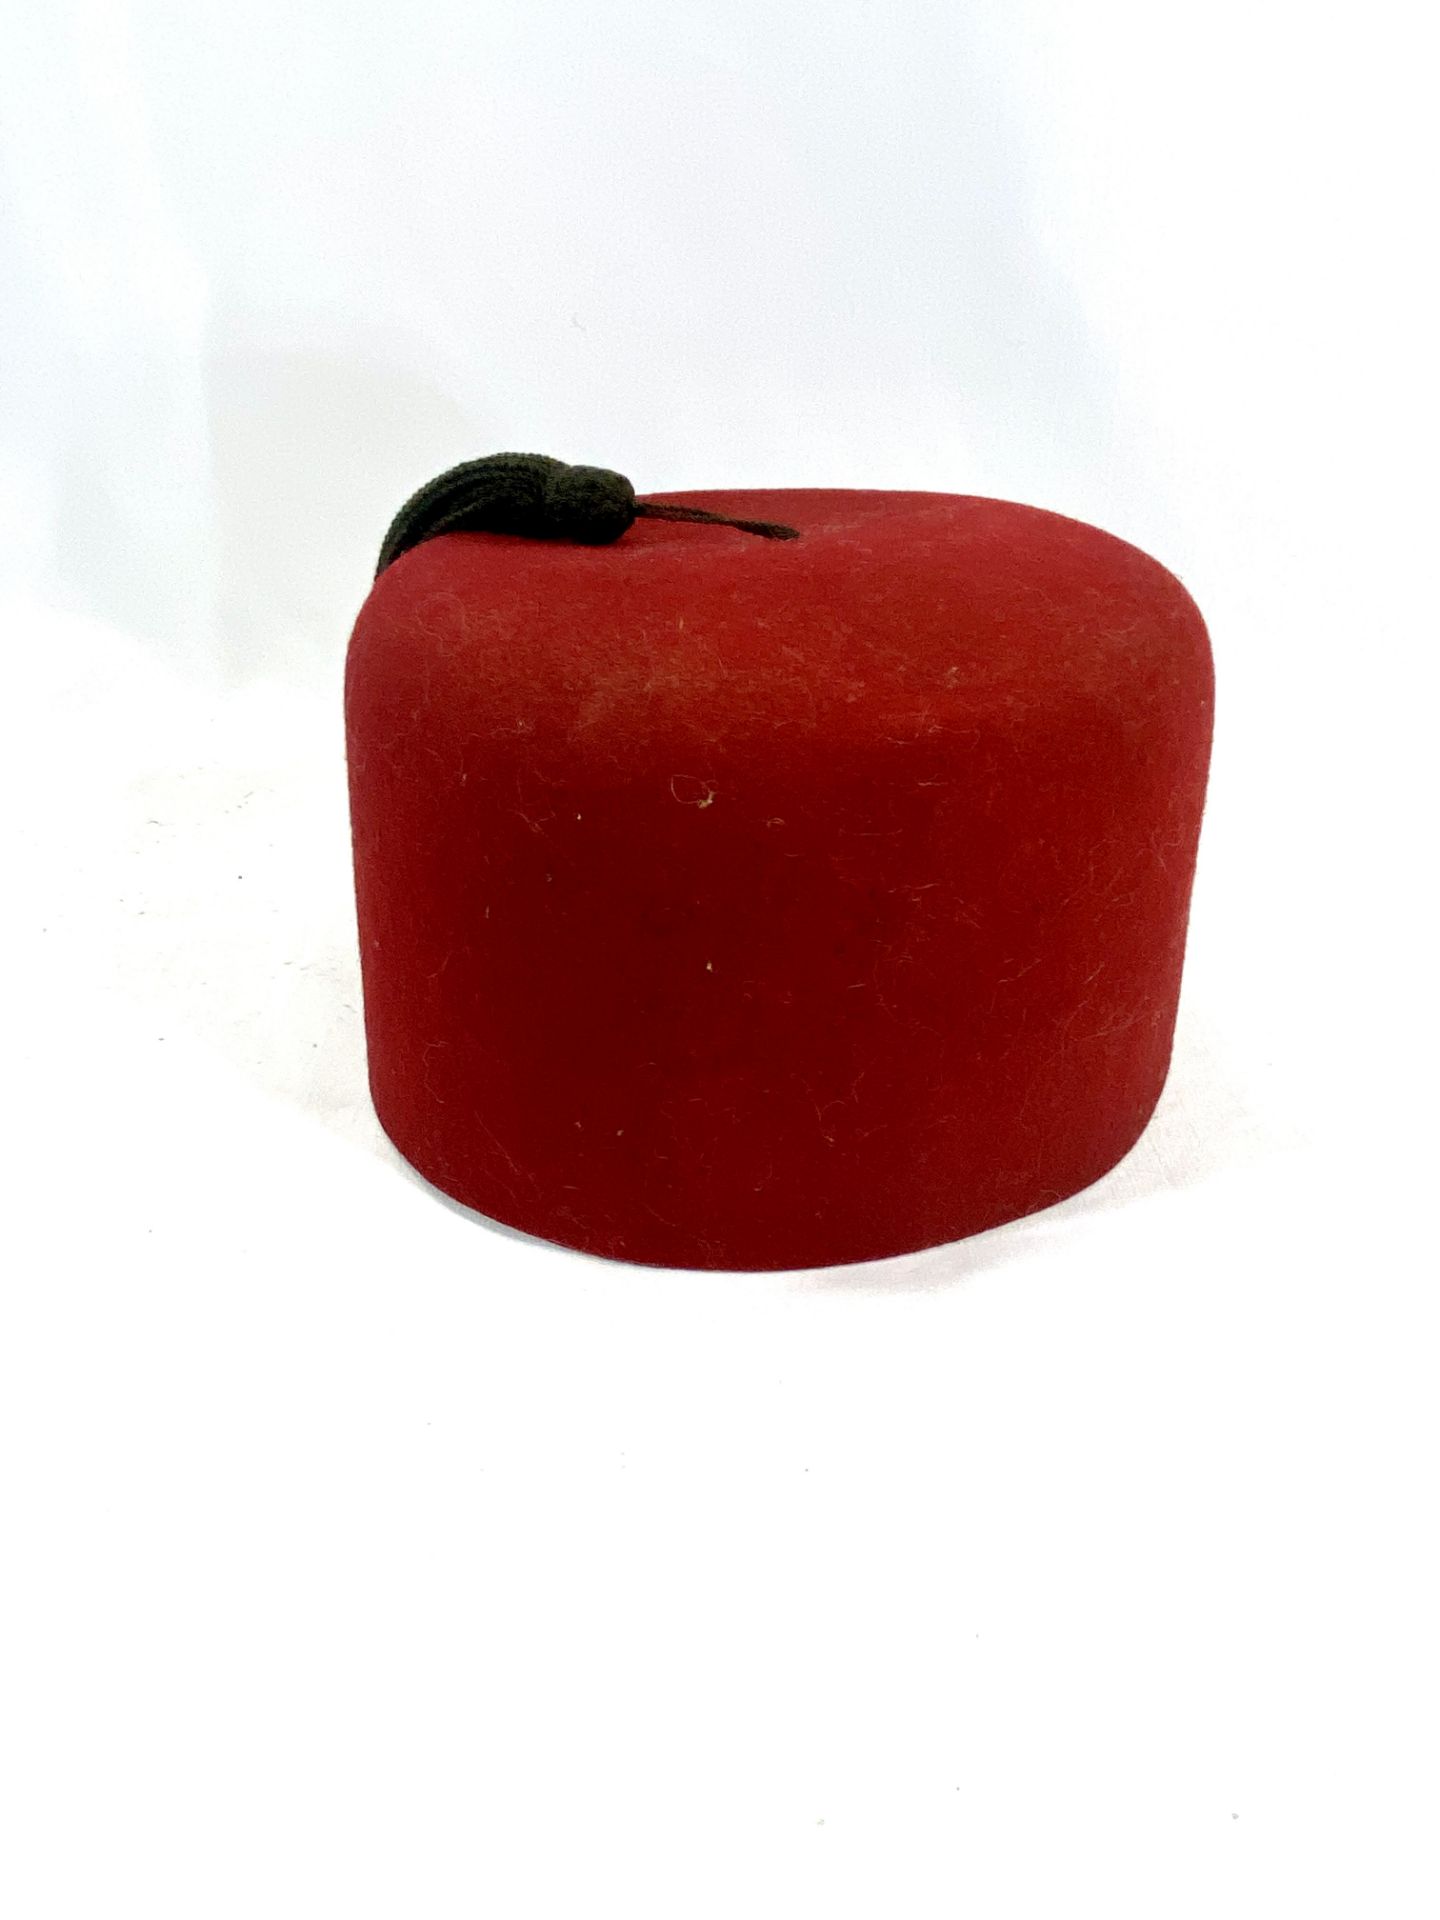 War Department fez, as given by Tommy Cooper - Image 3 of 16